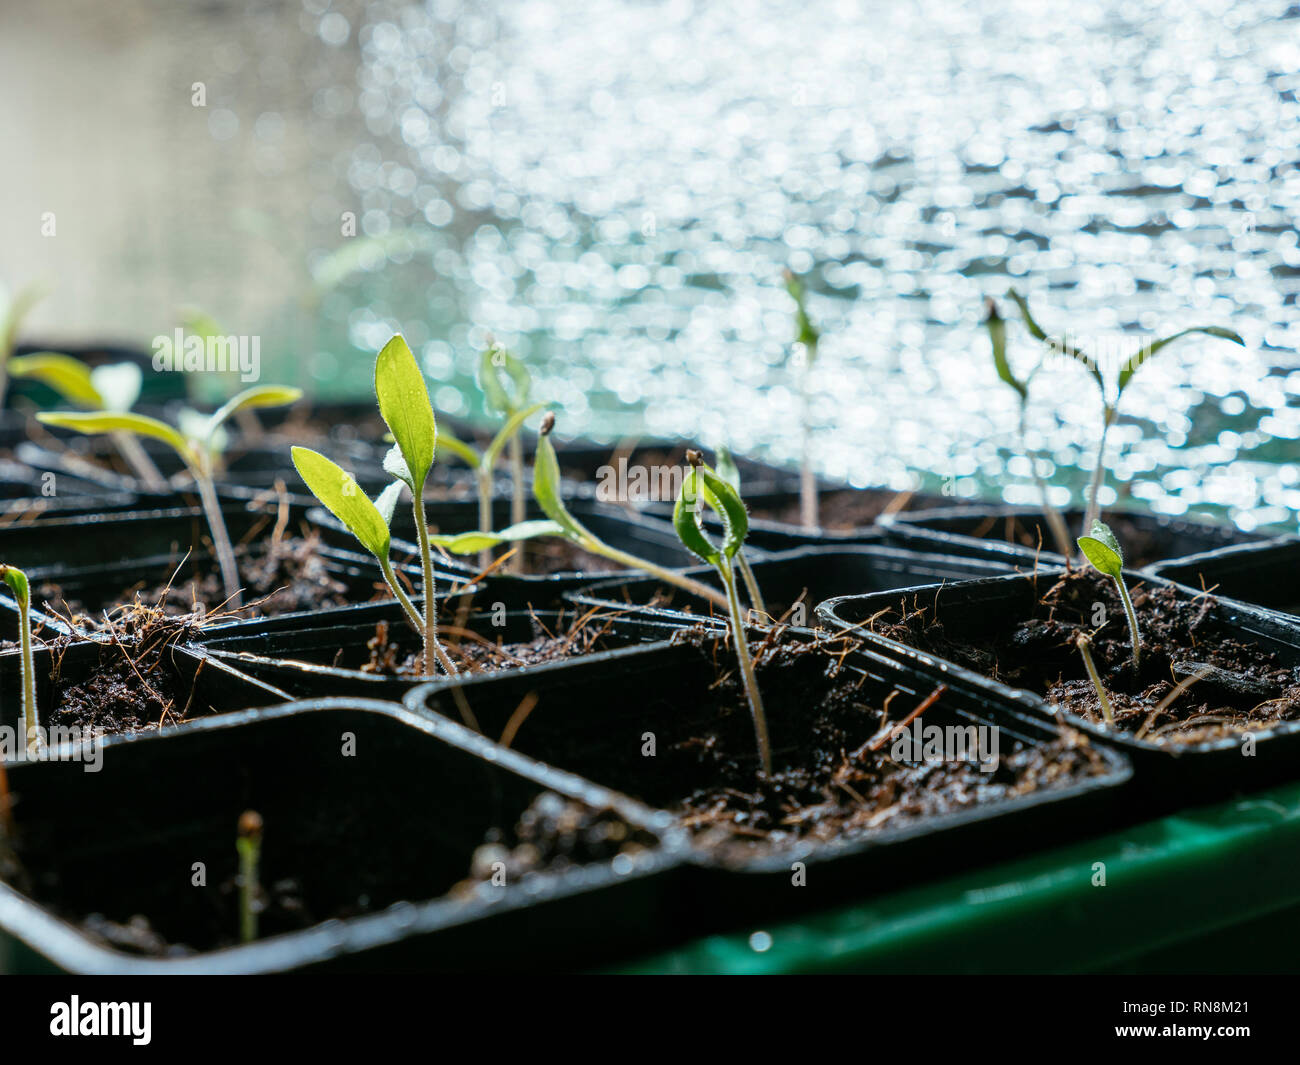 Tomato seedlings growing indoors under a grow light. Stock Photo